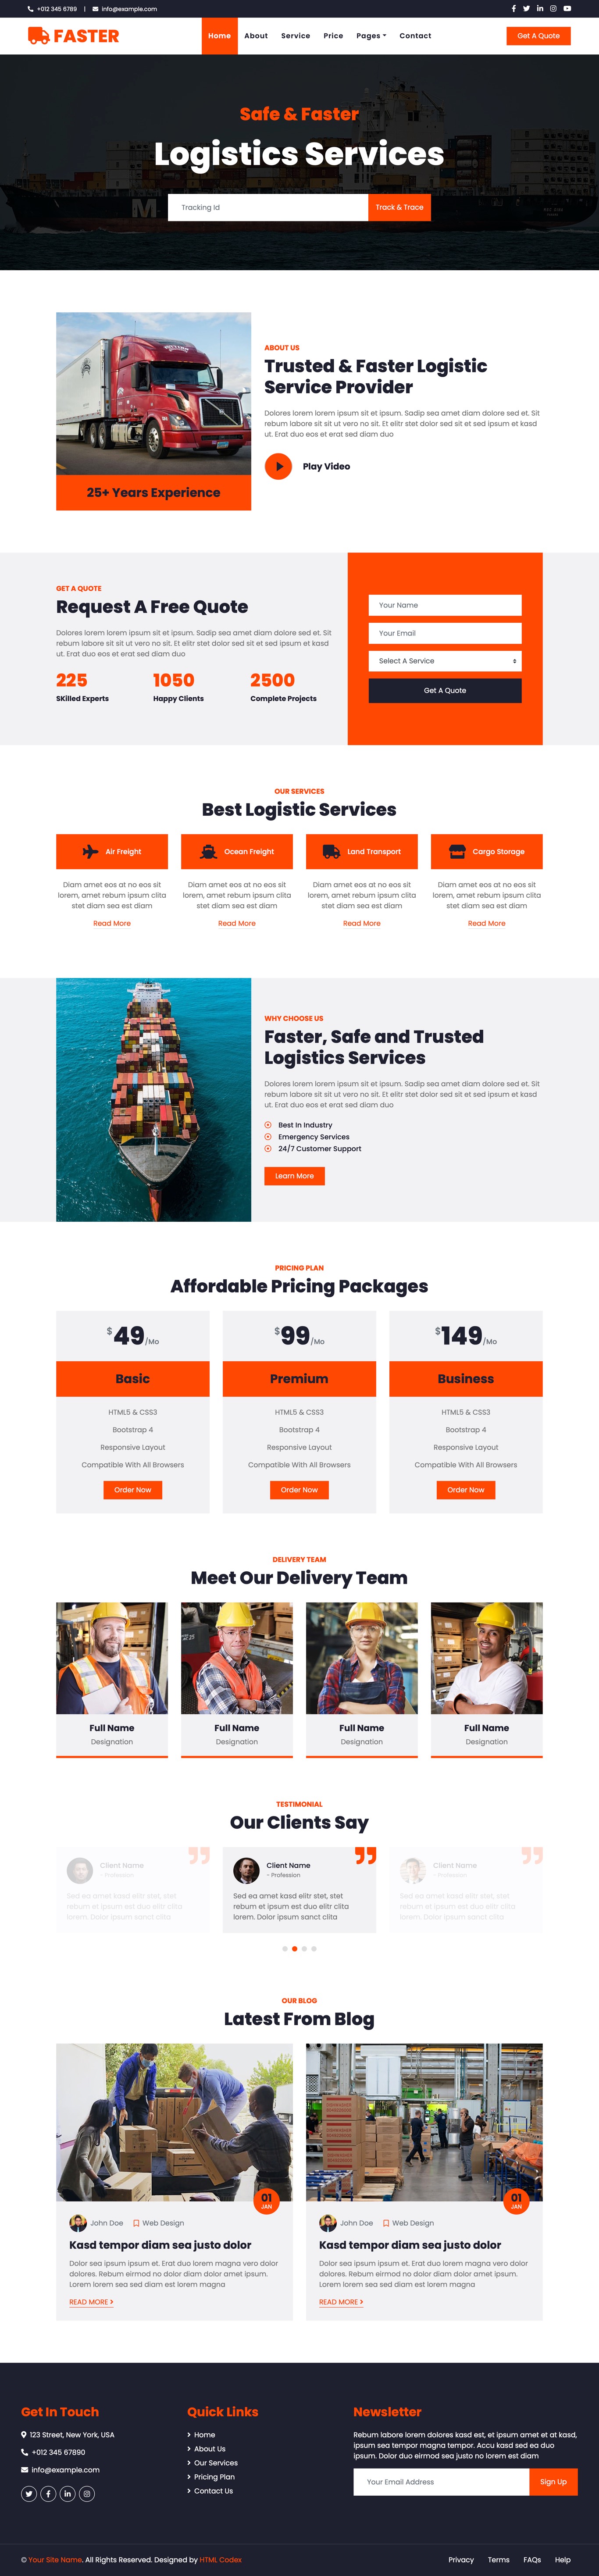 Faster Free HTML template